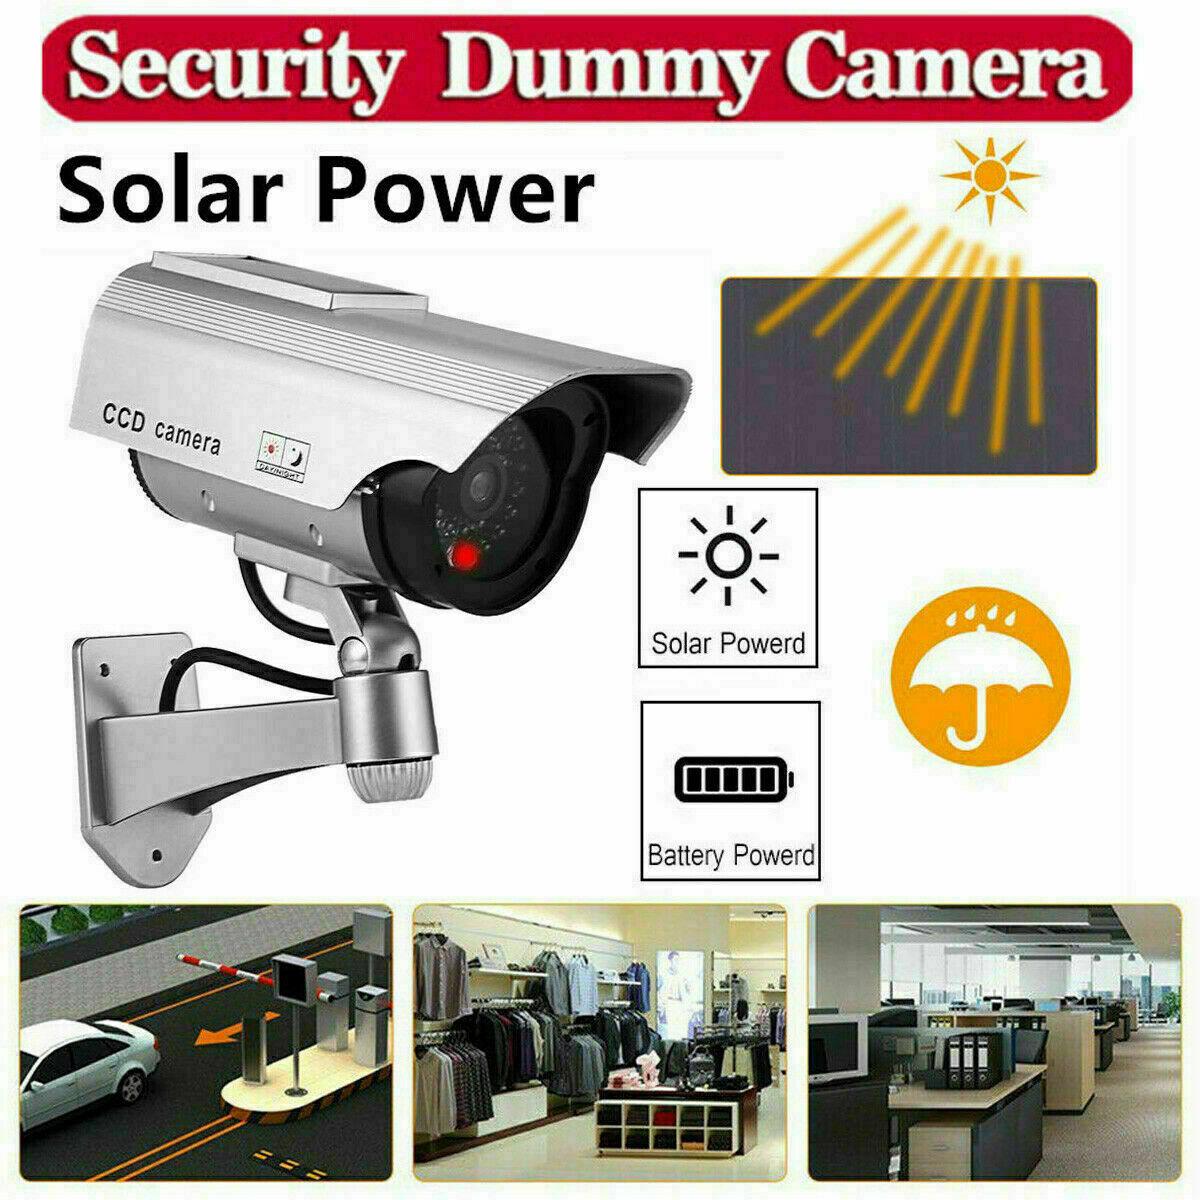 Solar Powered Dummy Security Camera, Bullet Fake Surveillance System with Realistic Red Flashing Lights and Warning Sticker Indoor Outdoor - Office Catch